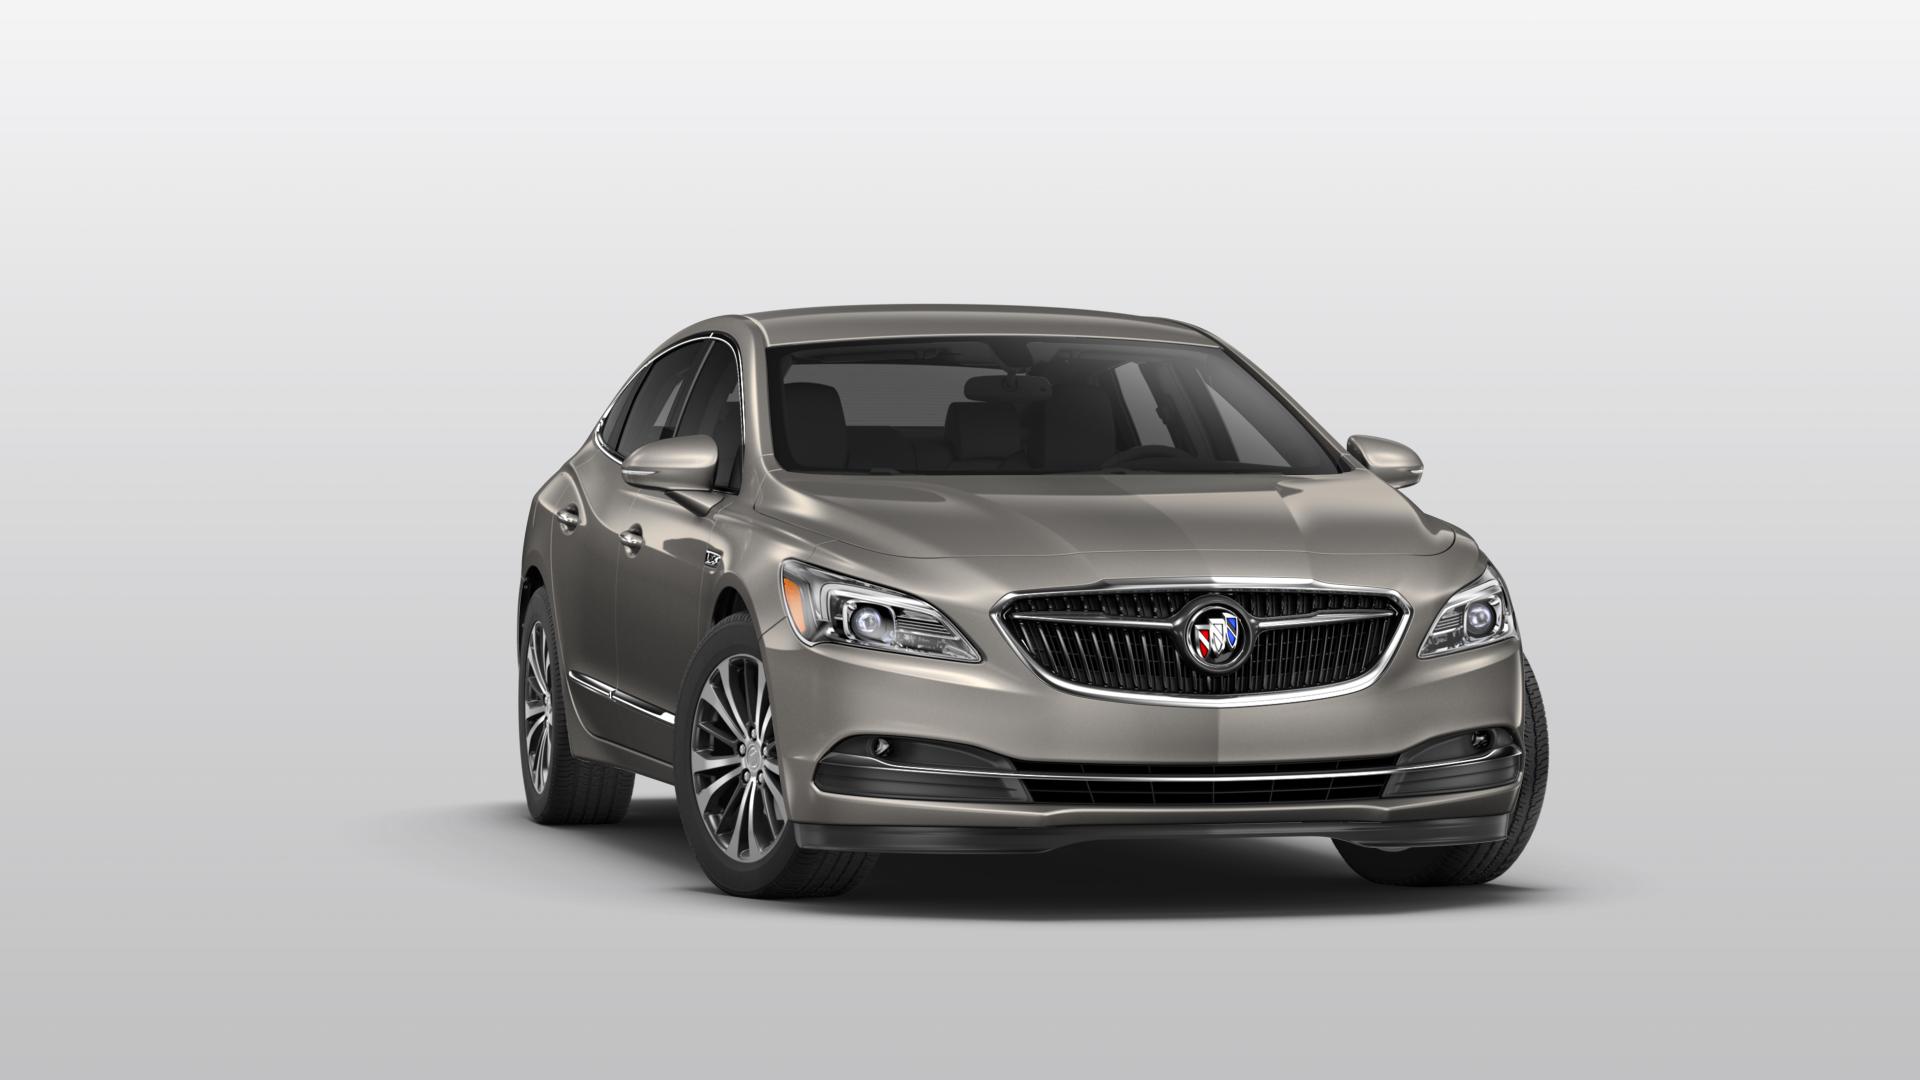 Buick Lacrosse front view